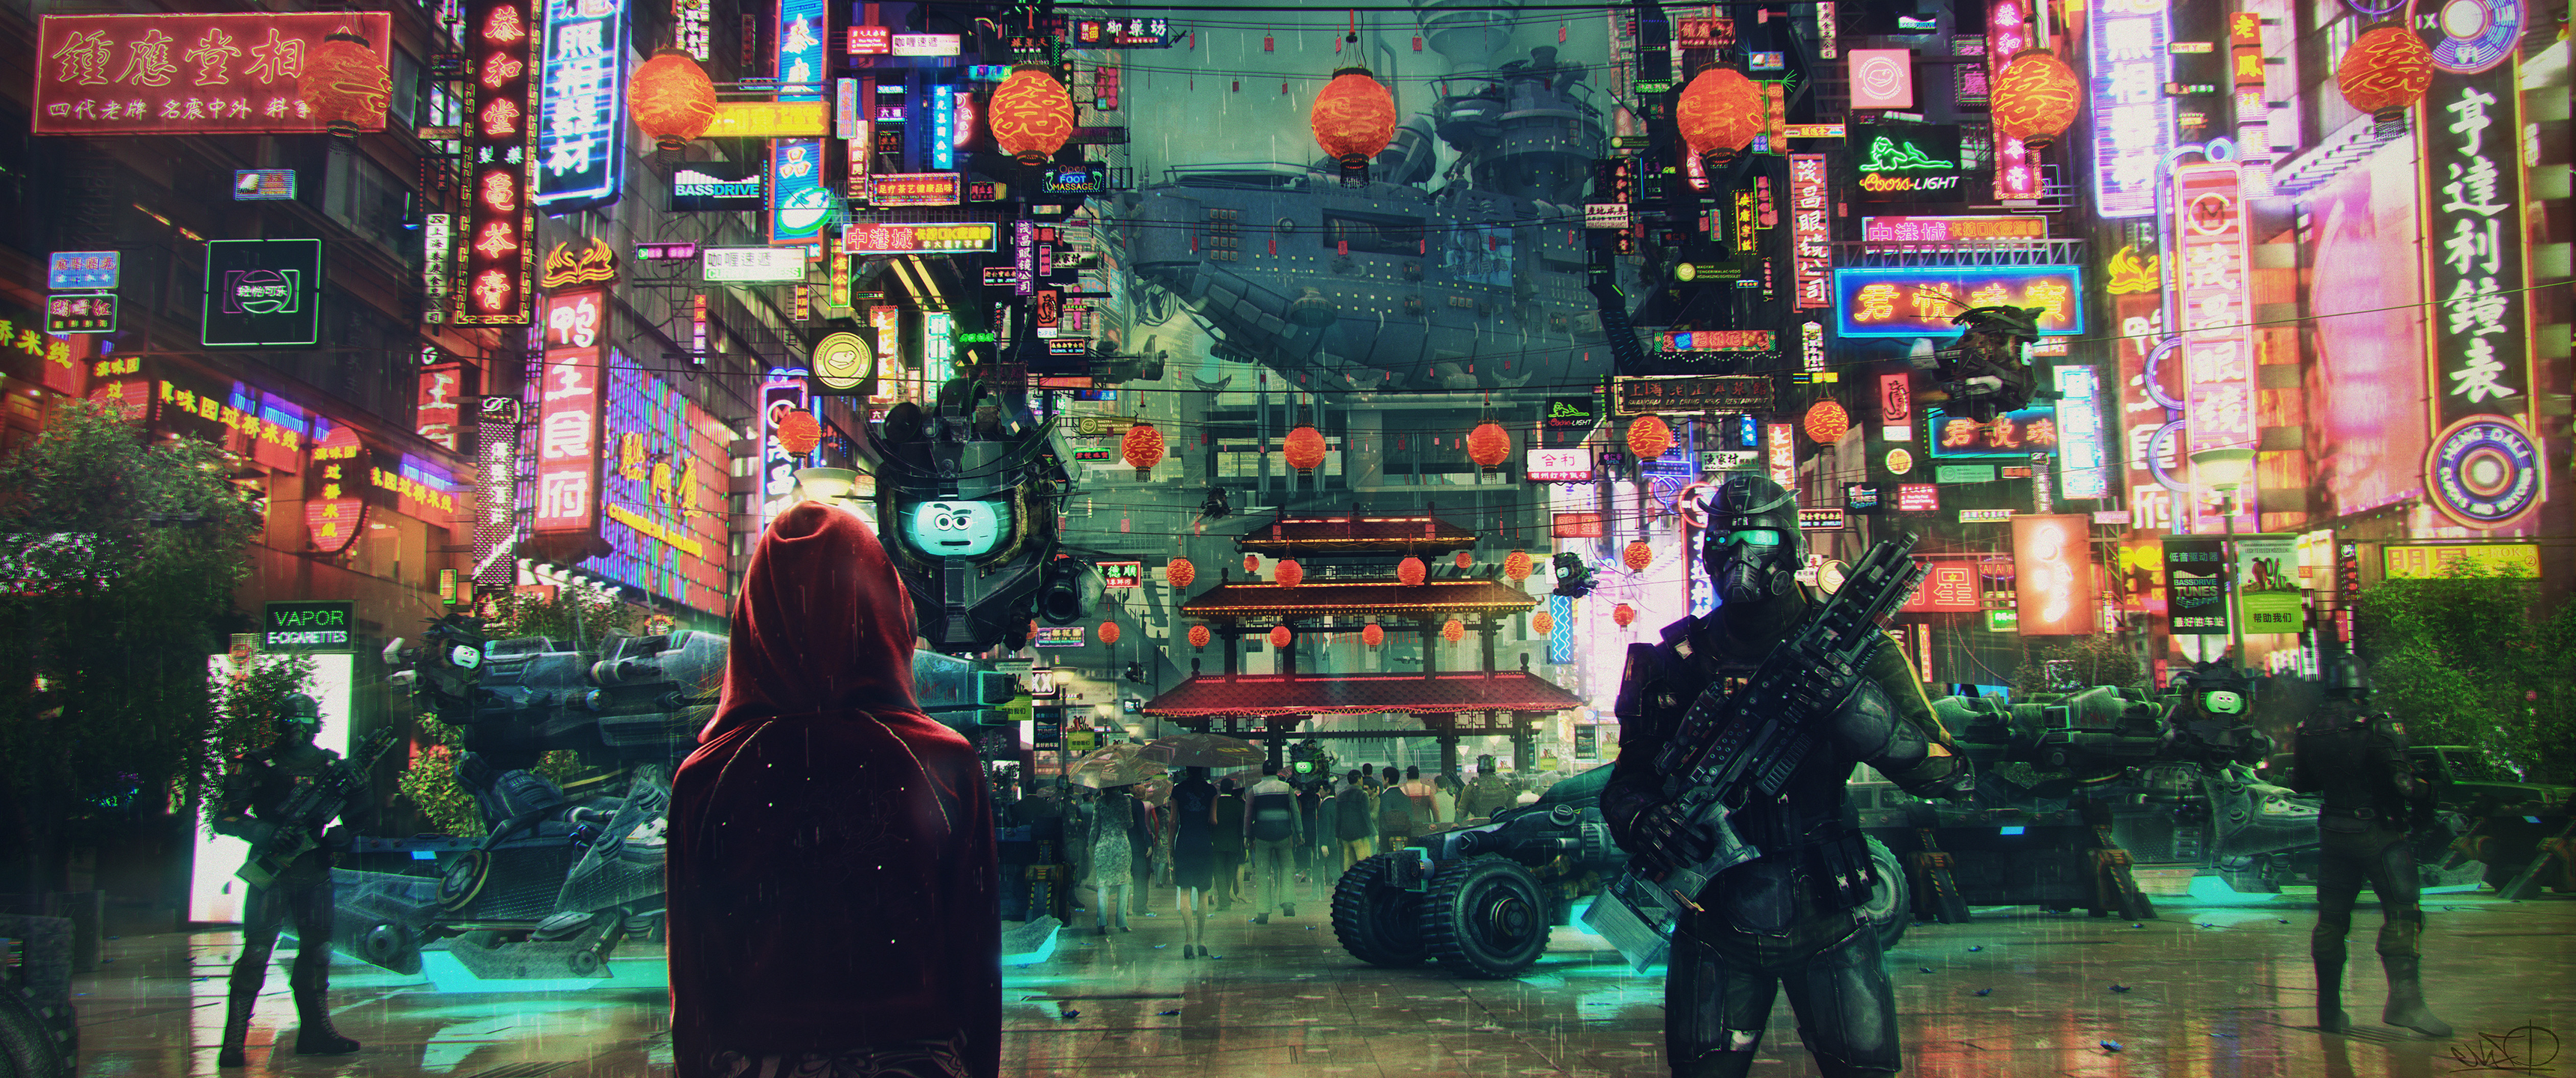 OC] Panopticon Overview - Animated cyberpunk city for ultrawide monitors :  r/wallpaperengine